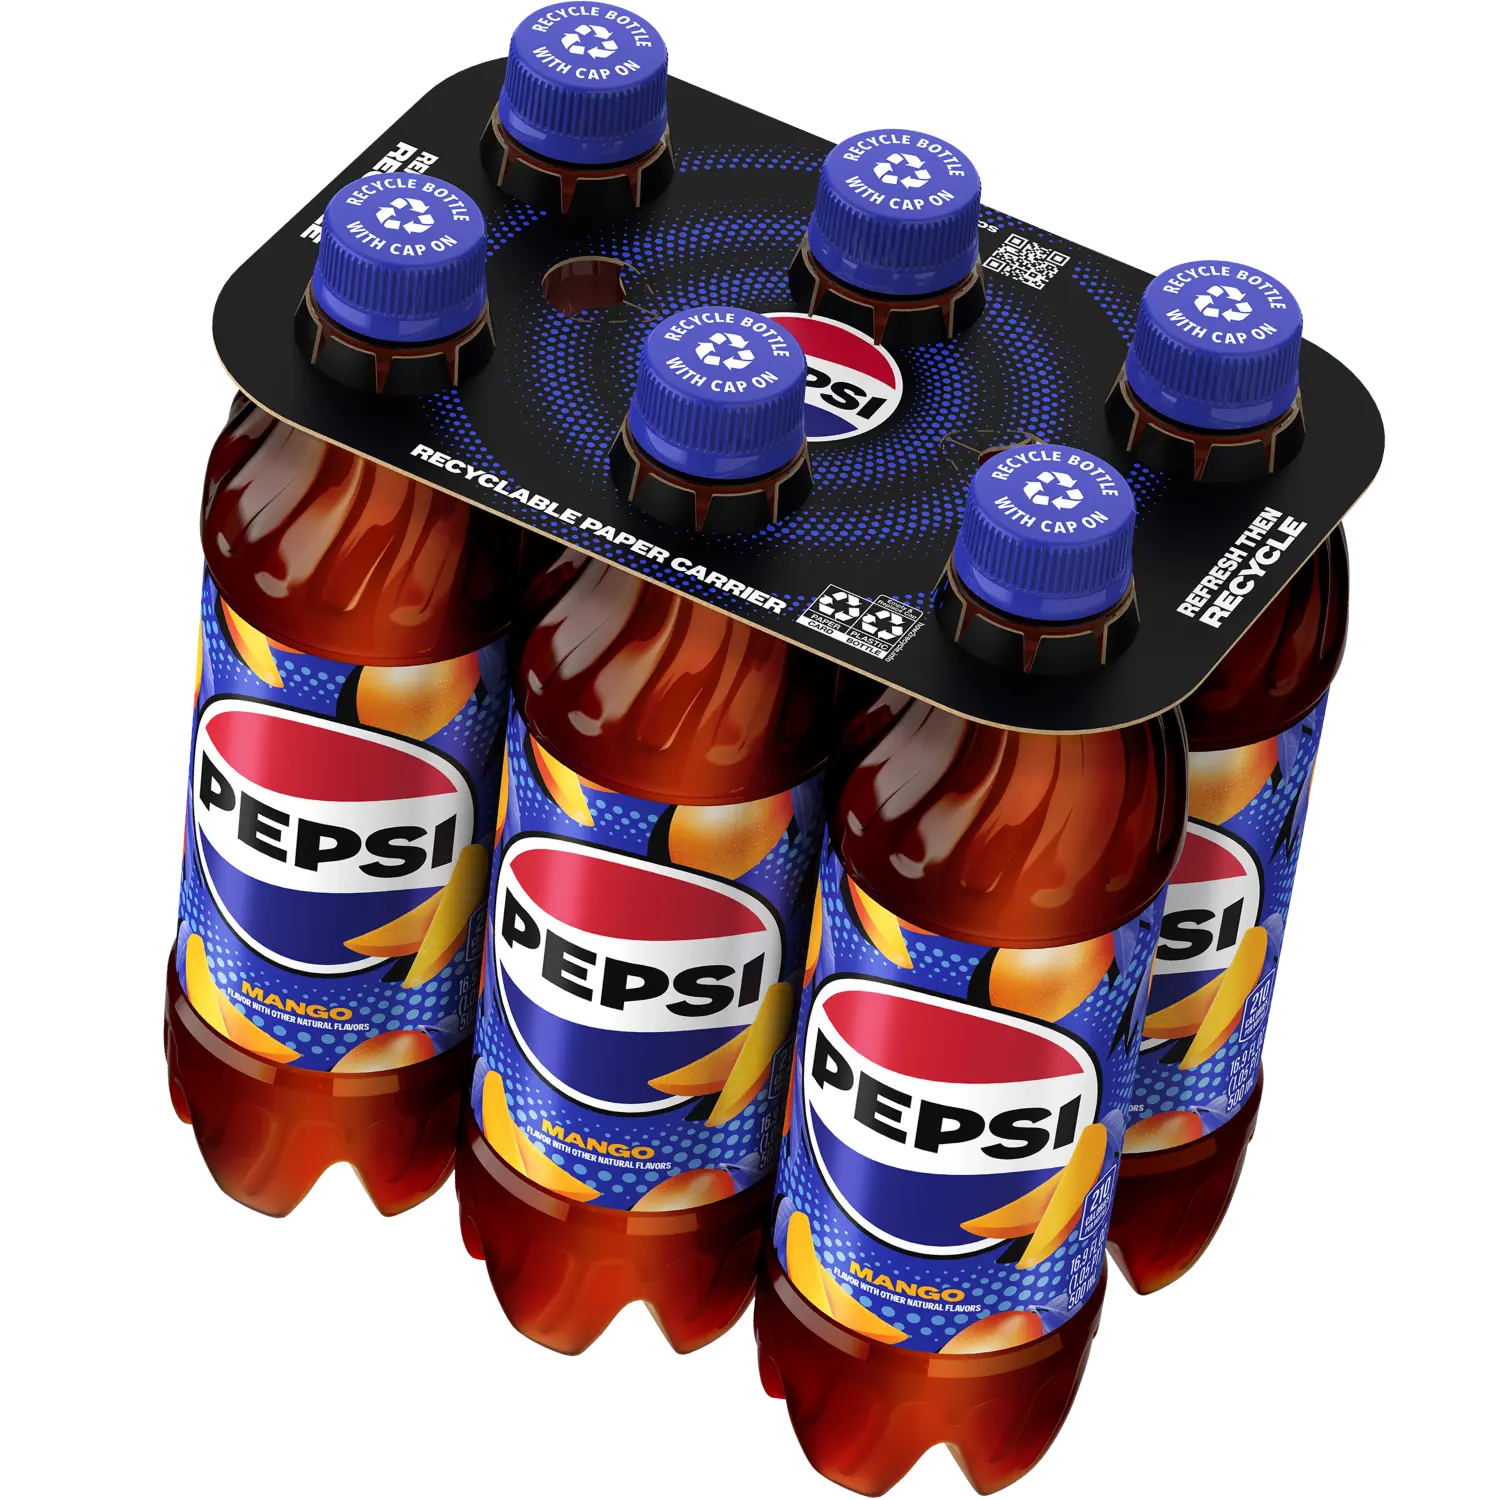 6 pack of Pepsi Mango bottles with a recyclable paper carrier